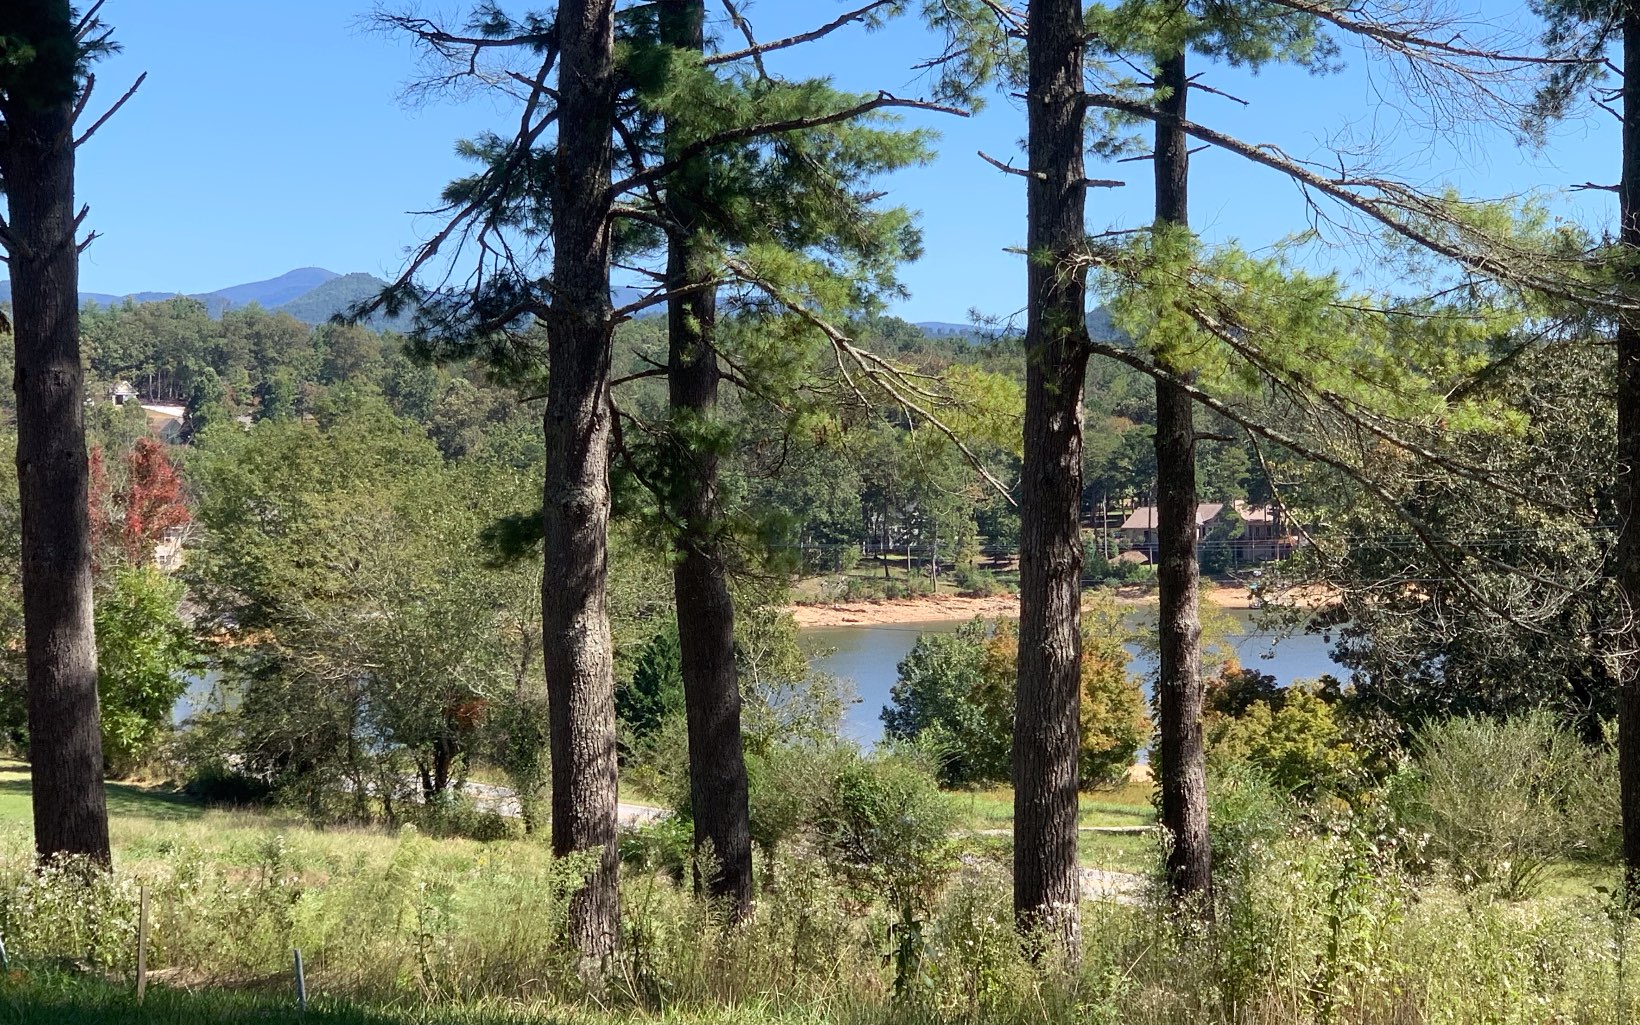 Lake season is here! Here is your chance to build in Blairsville's newest Lake Community Highland Park on beautiful Lake Nottely! This 0.91 acre lot has year round mountain & lake views. Borders a small stream in a private setting.The terrain is gentle, but would make a great basement lot! Near the cul-de-sac for best privacy! Community offers lake access, paved roads, amazing mountain & lake views, fiber optic internet, underground utilities (power/water) & gated access. The clubhouse is lakefront with a salt water infinity pool, full kitchen, outdoor fireplace, lots of decking overlooking the lake, exercise room, theatre room, childrens play room, pool table/game room & boat slips. This is the place to live! Less than 5 minutes back to Blairsville. The county offers hiking access to the Appalachian Trail, waterfalls, Vogel State Park, Meeks Park, Brasstown Bald (GA's highest mountain) and lots of other hiking trails. We also have a wonderful Farmers Market, great restaurants, quaint shops around the historic square, 2 golf courses, wineries & a short drive to the casino in Murphy, NC!